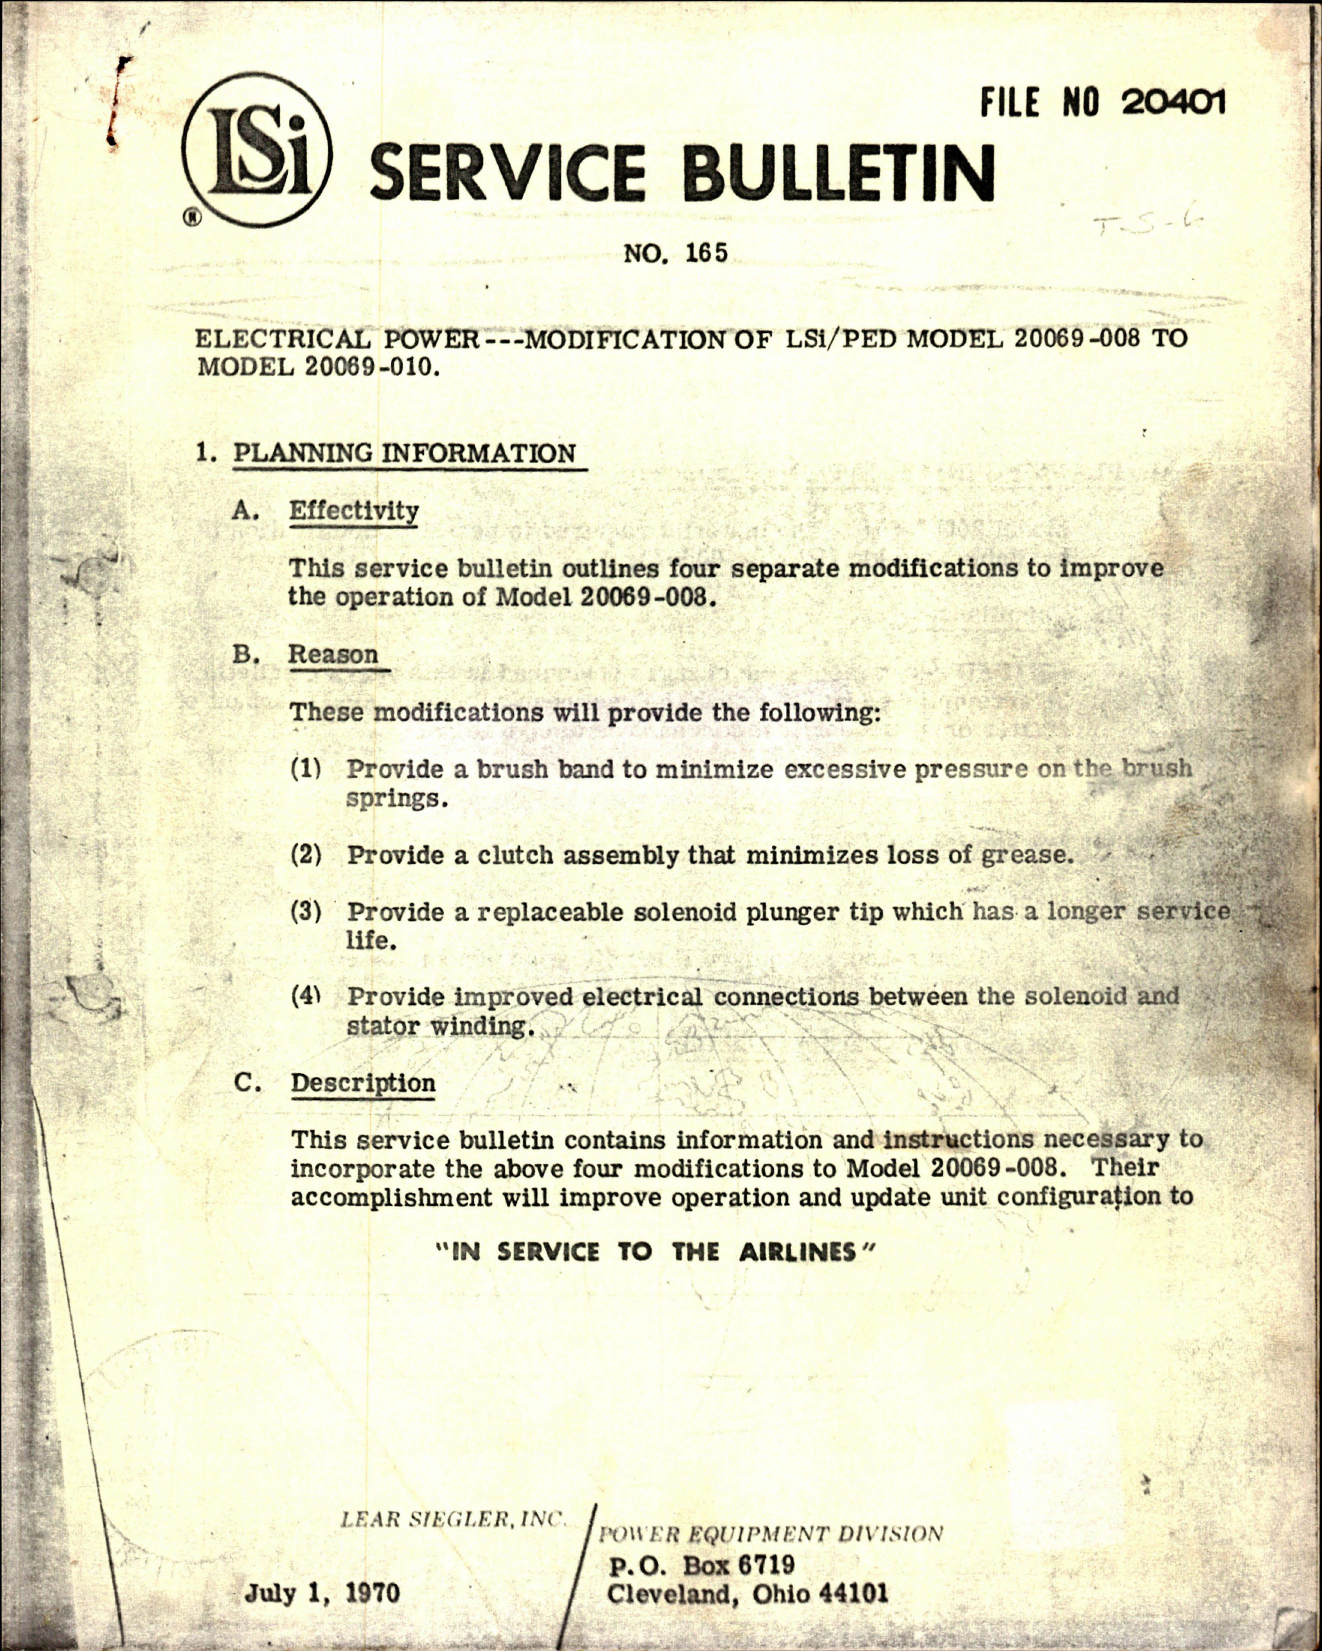 Sample page 1 from AirCorps Library document: Service Bulletin No. 165 for Modification of Electrical Power 